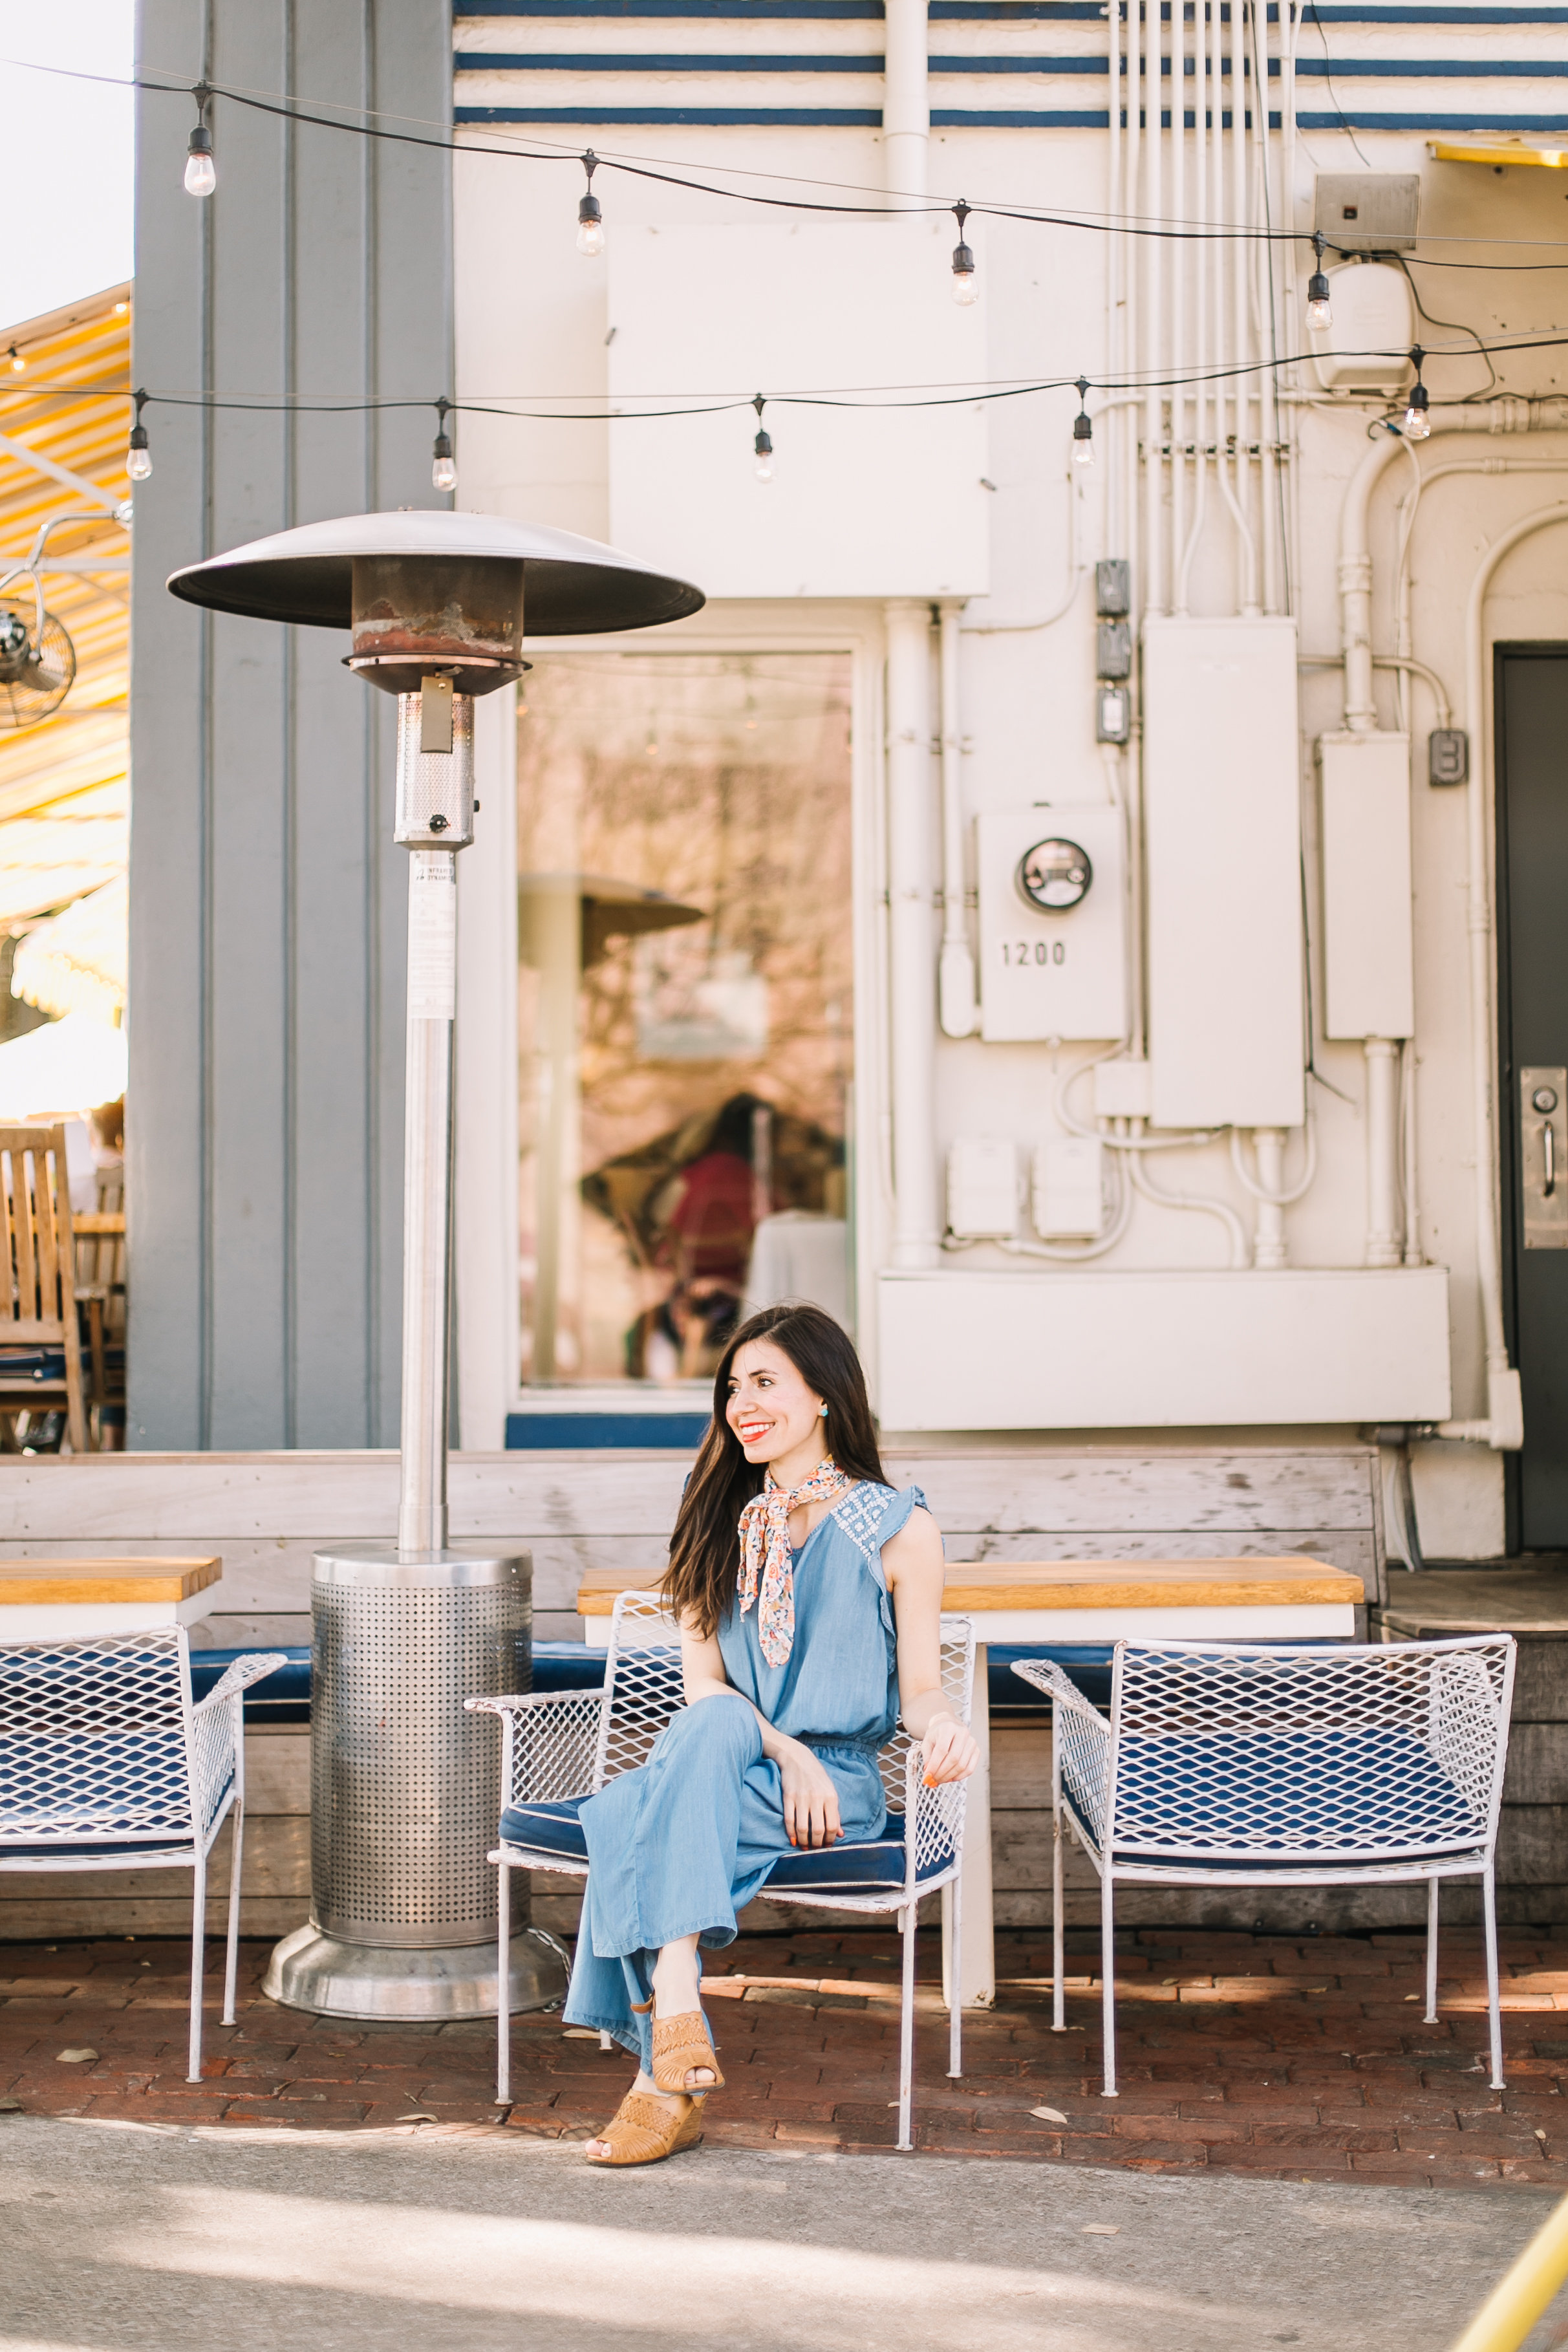 20 Of The Most Instagrammable Coffee Shops, Bars, & Restaurants In ...